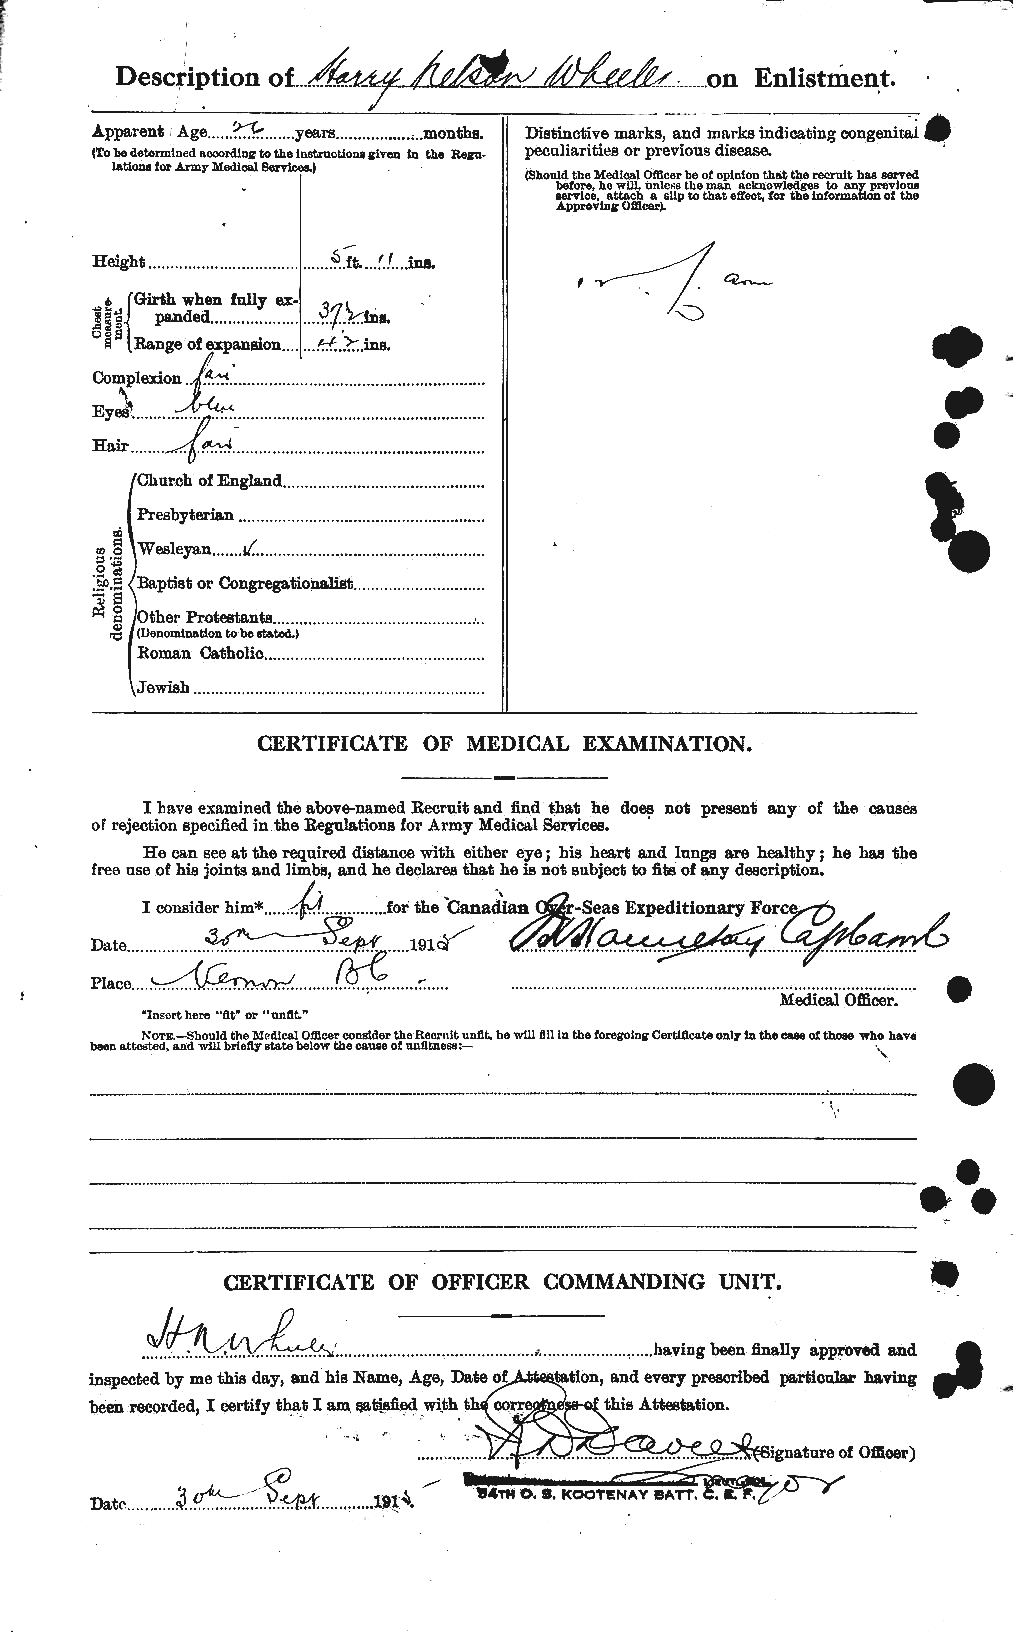 Personnel Records of the First World War - CEF 666567b